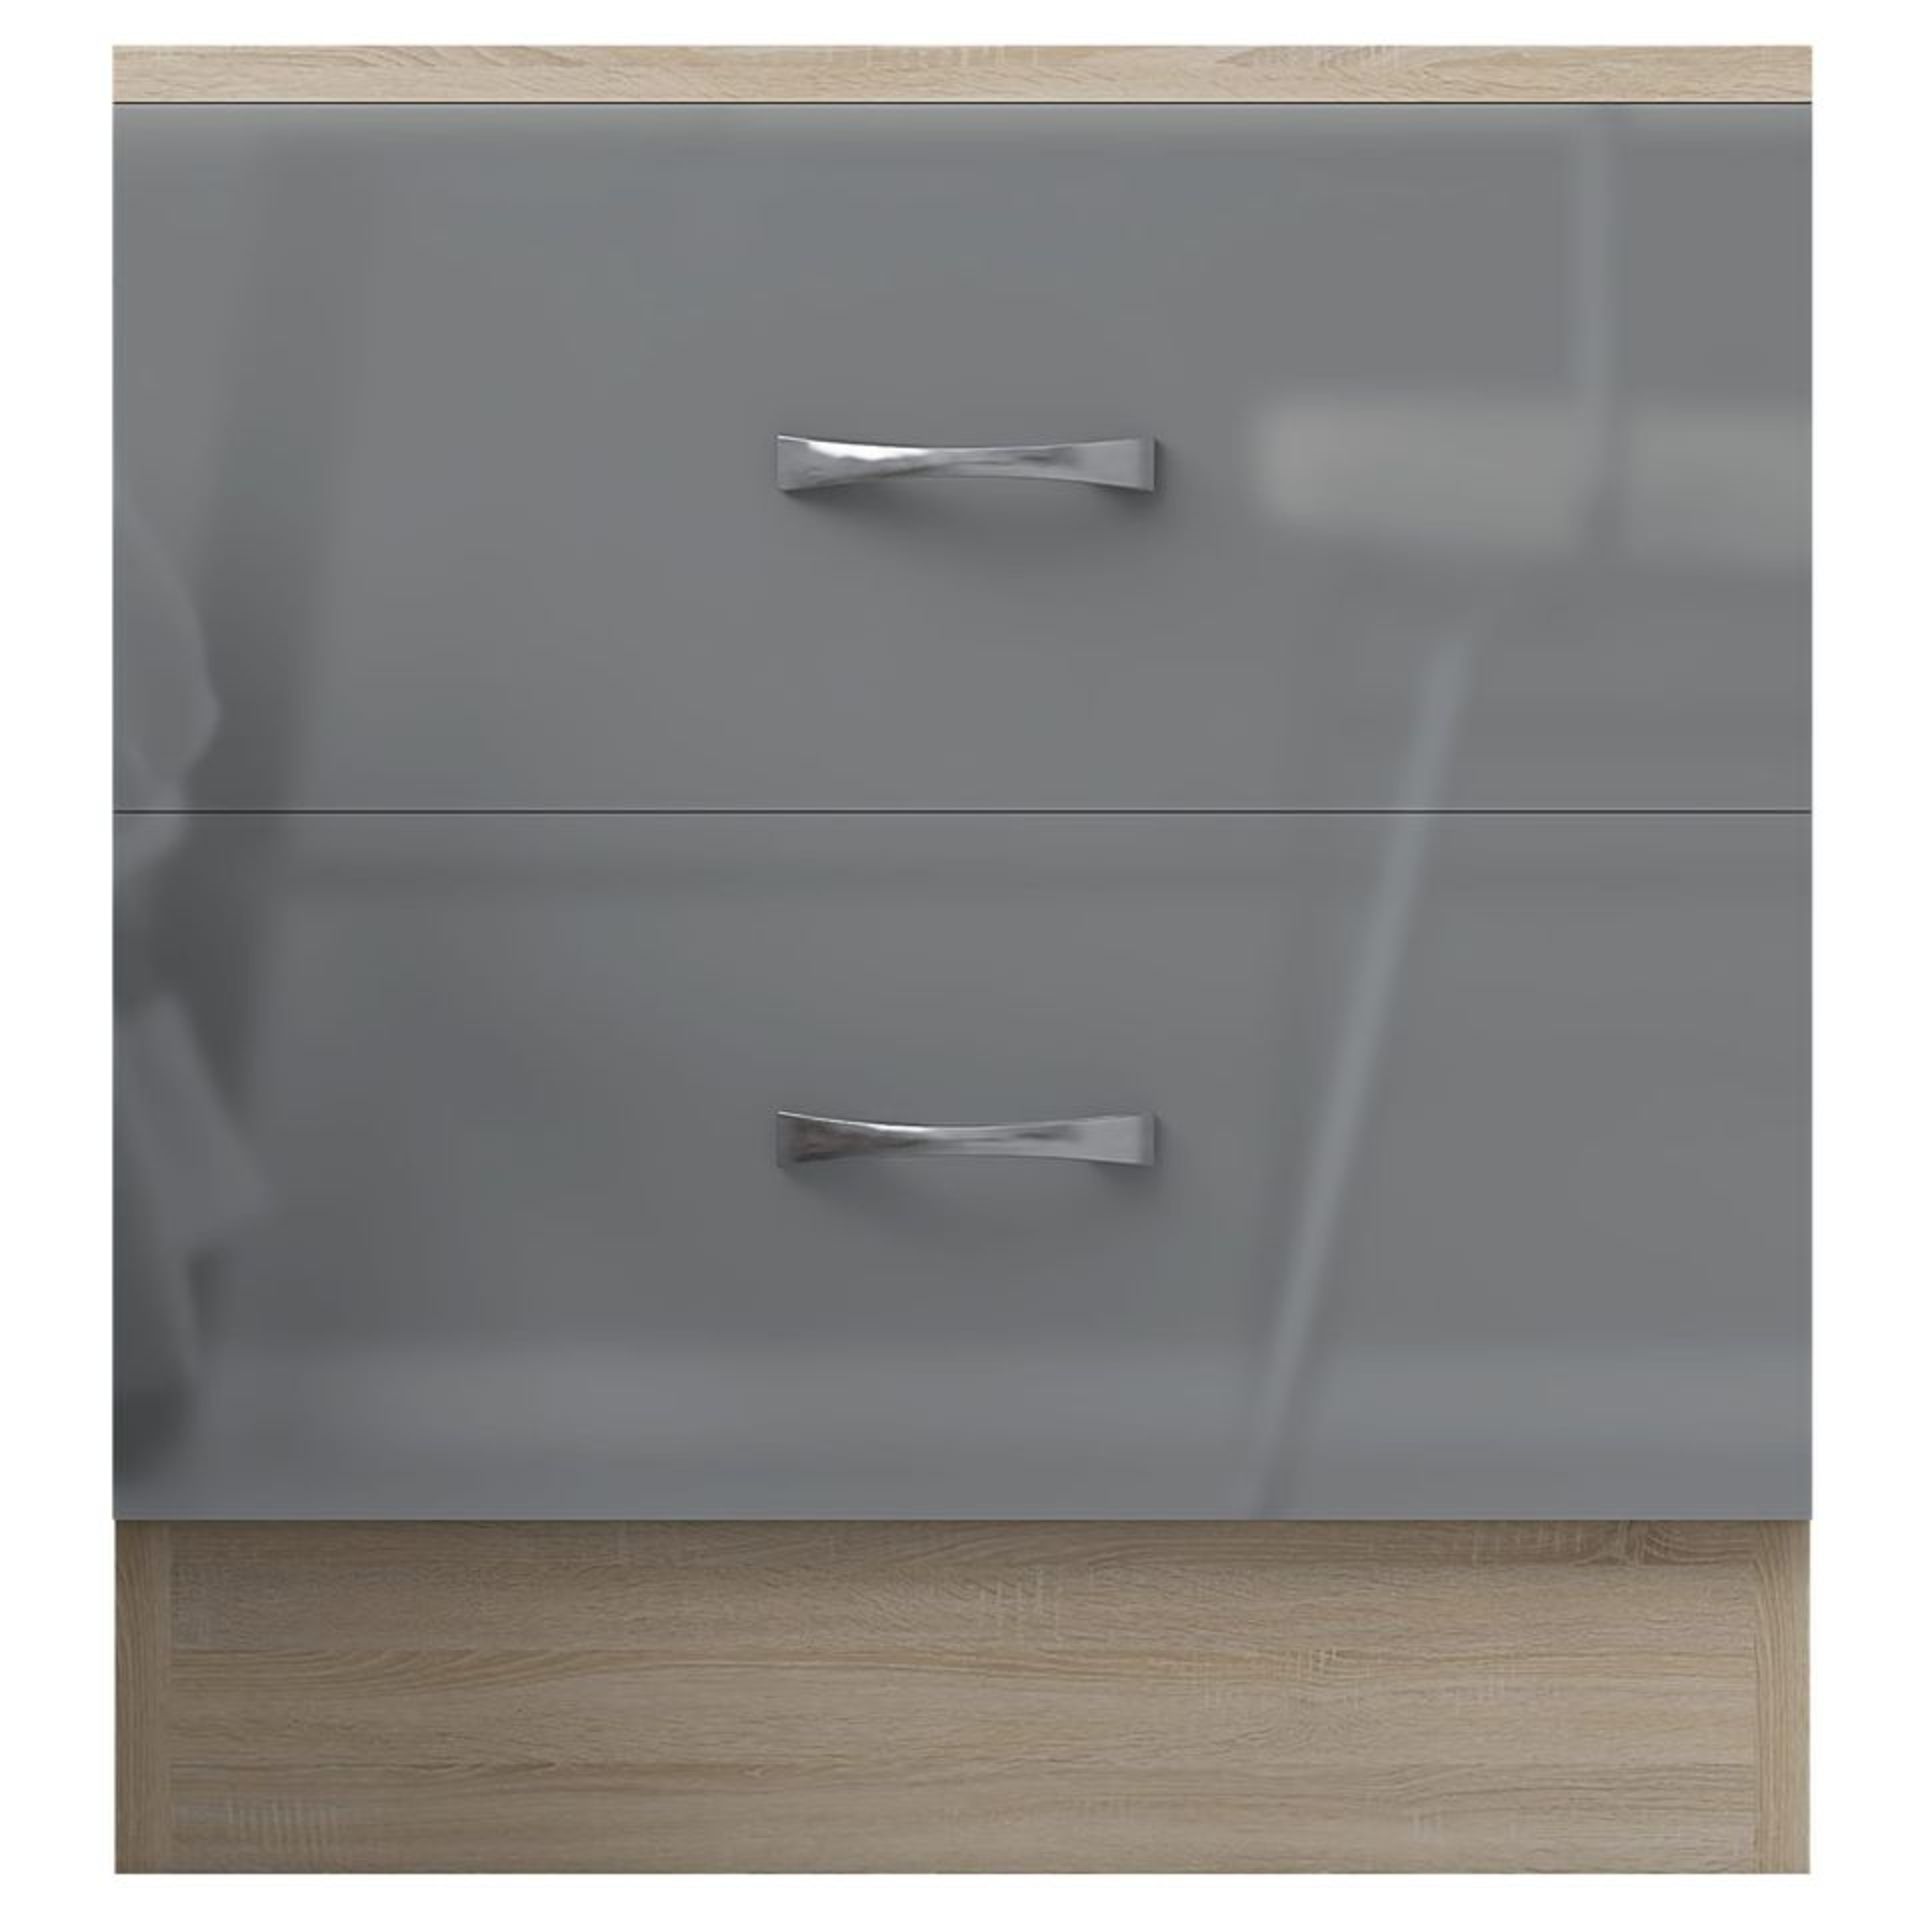 10 X HARMIN GREY HIGH GLOSS ON OAK FRAME 2 DRAWER BEDSIDE CABINET TABLE - With its clean stylish - Image 2 of 2